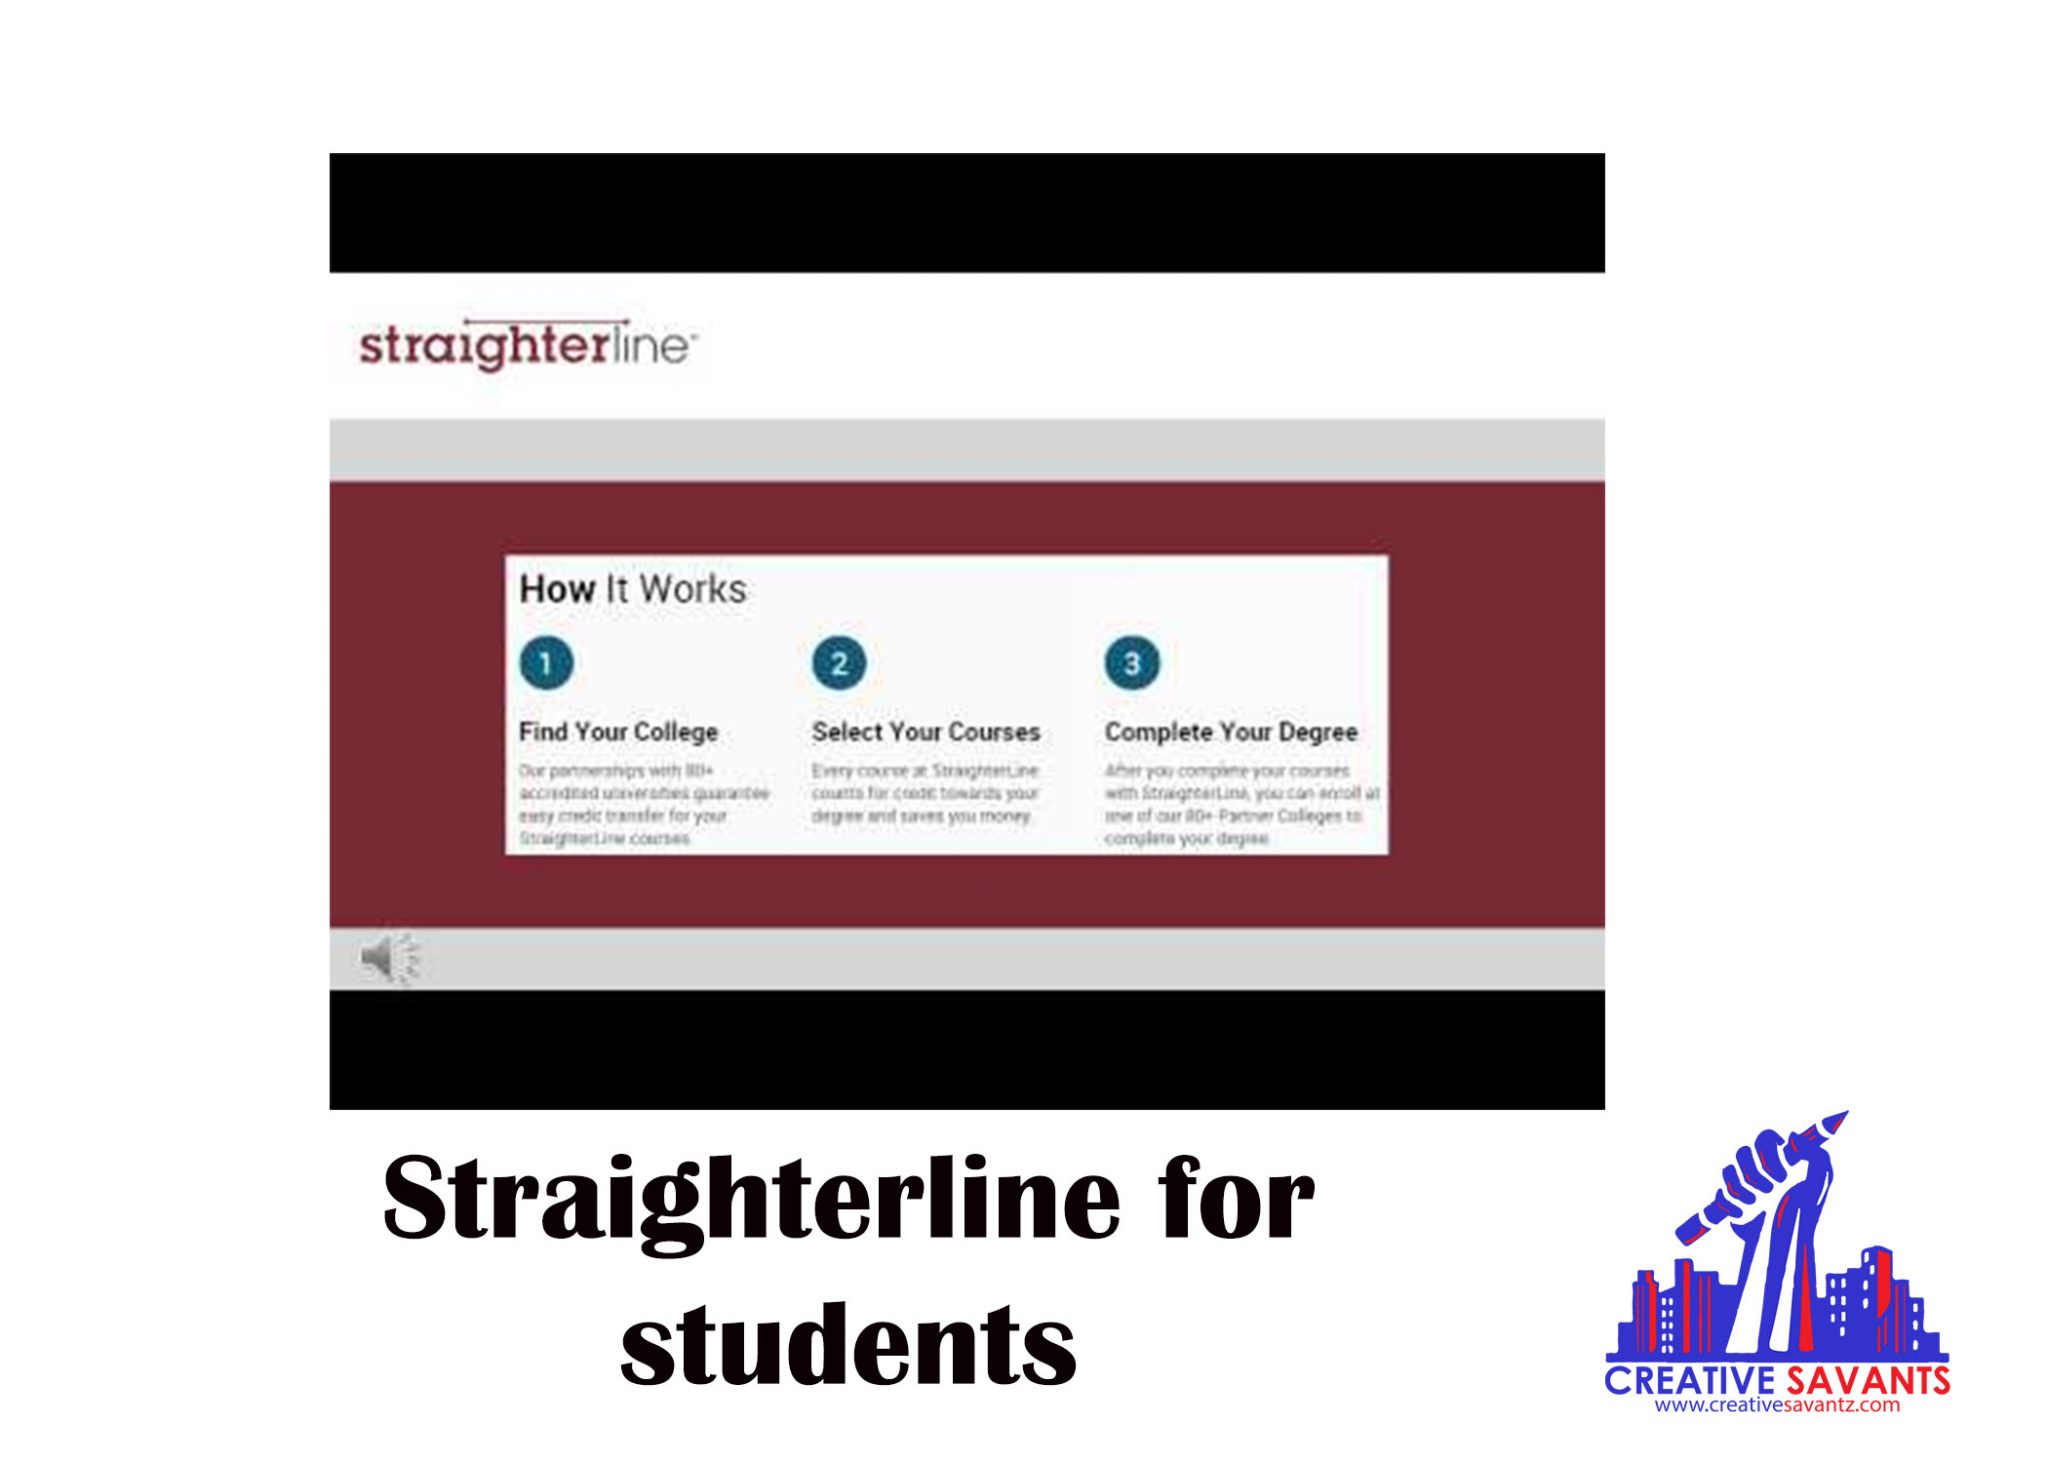 Straighterline for students